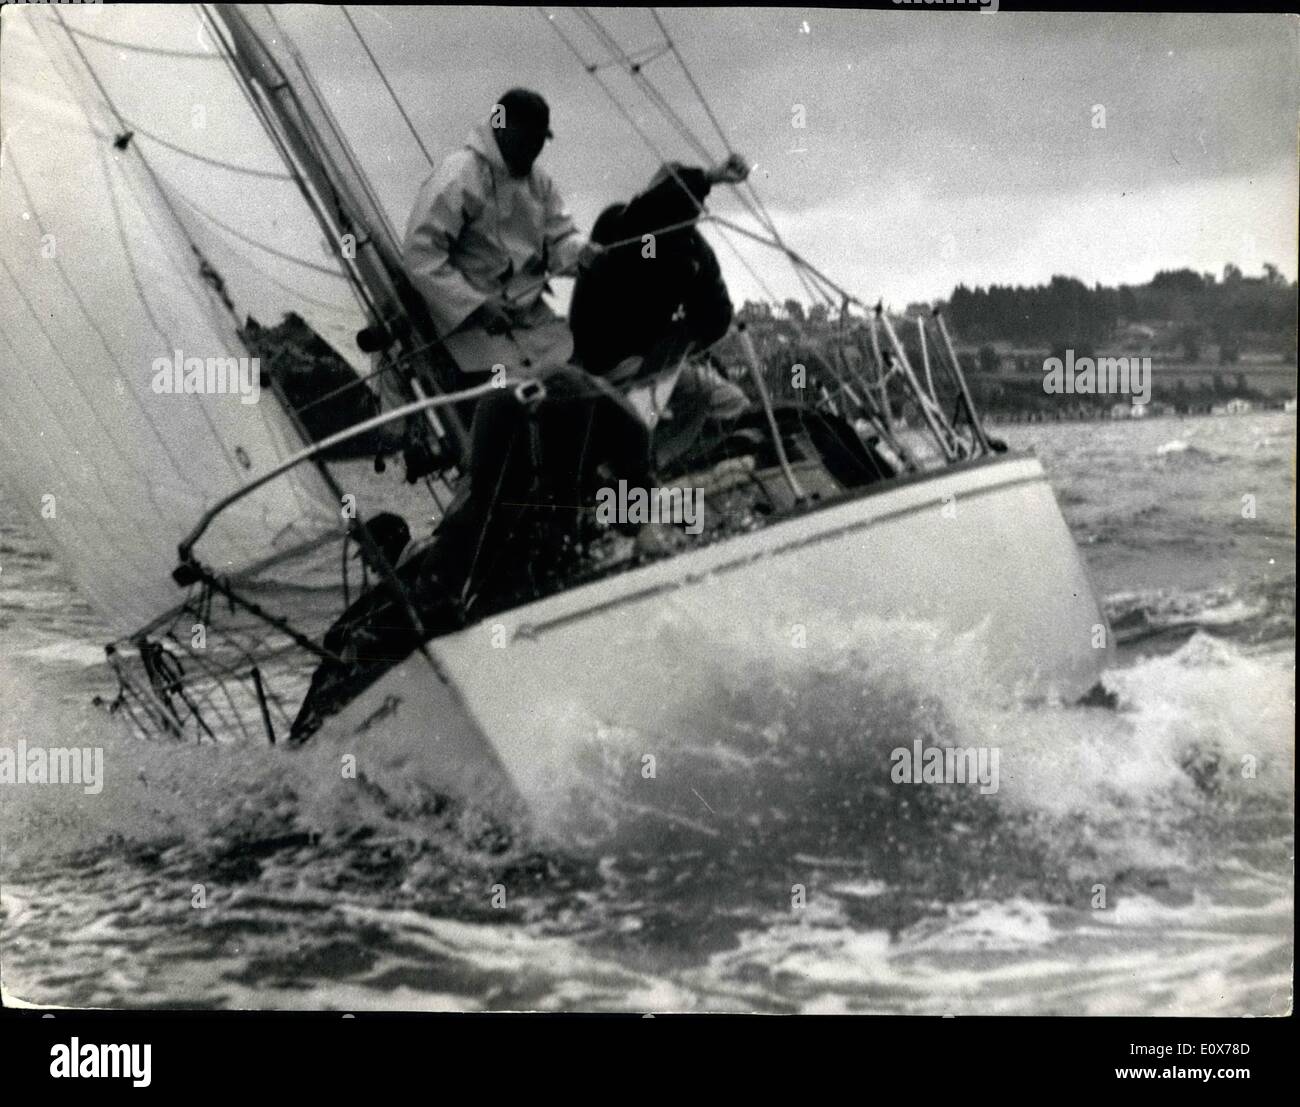 Jul. 07, 1965 - Practising for the Admiral's cup.: yachts for the Australian team which is competing for the Admiral's cur, were out training at Cowes. The cup is awarded on the combined results of the Channel race tomorrow, the Britannia cup during Cowes week and the New York Yacht club cup. The final 'leg' will be the biennial fastnet race which starts from Cowes on August 7. Photo shows Australian yacht Lorita Maria goes through heavy weather when rounding the buoy during training for the Admiral's cup races. Stock Photo